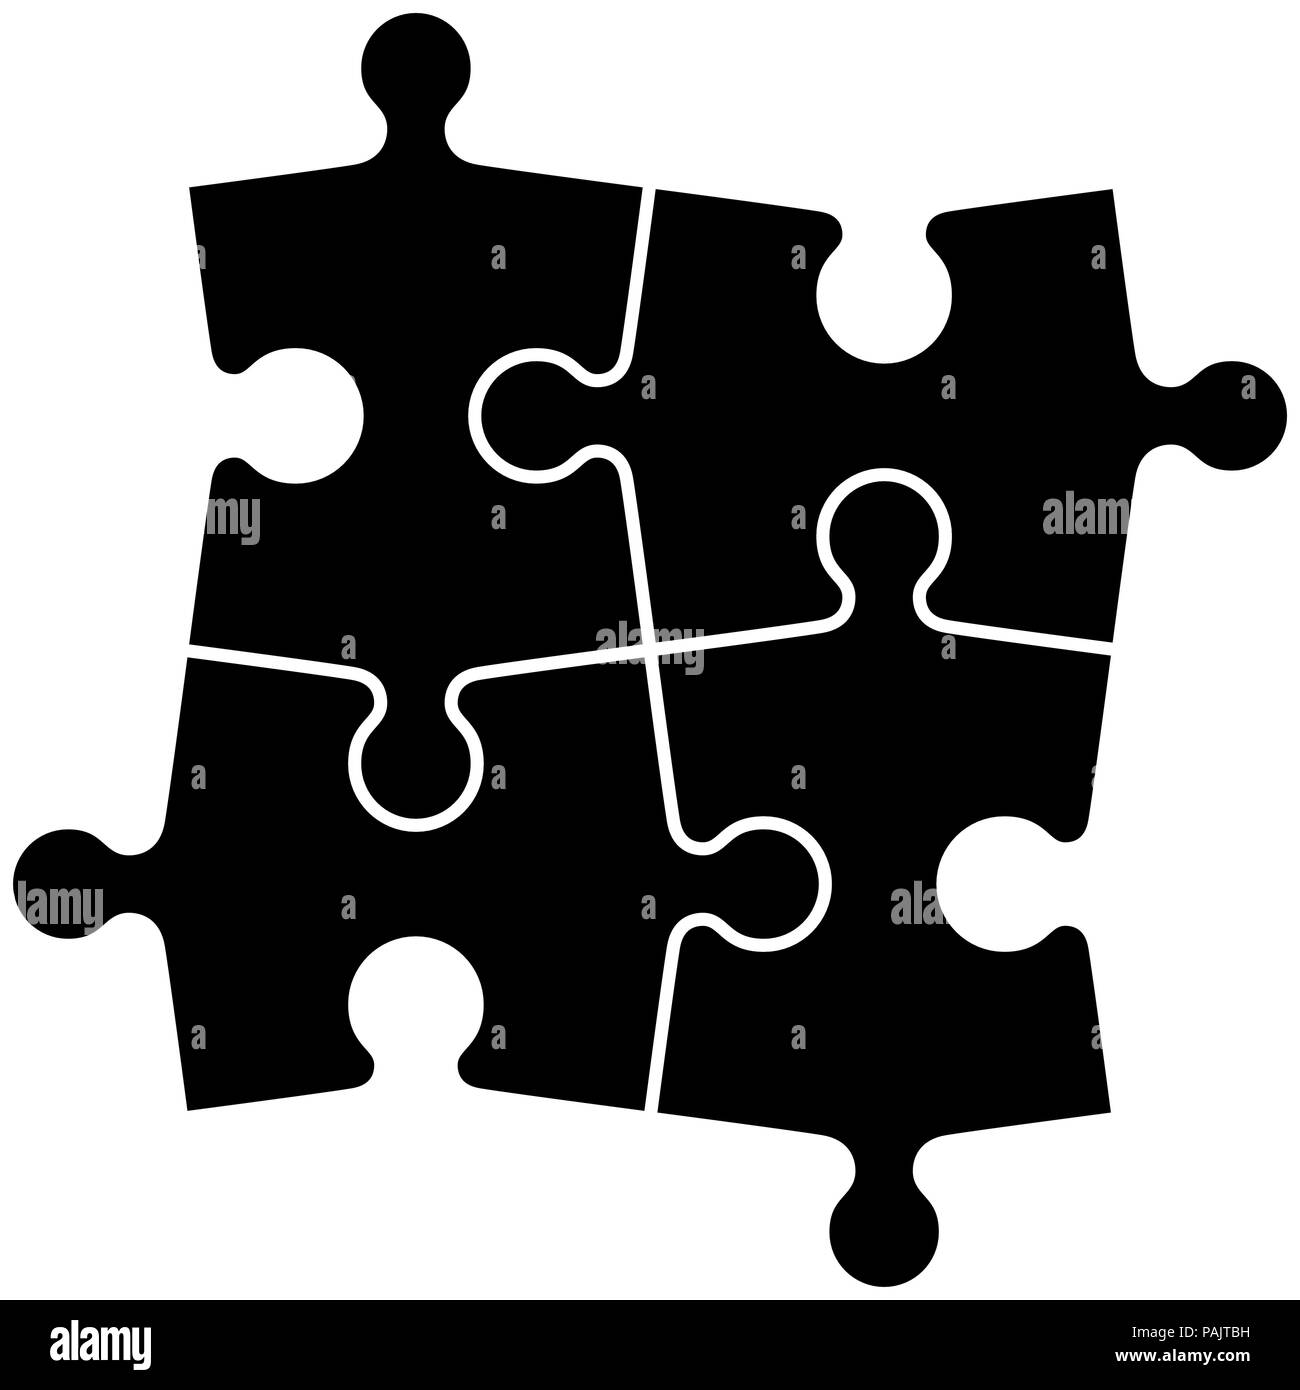 Set of puzzle pieces Stock Vector